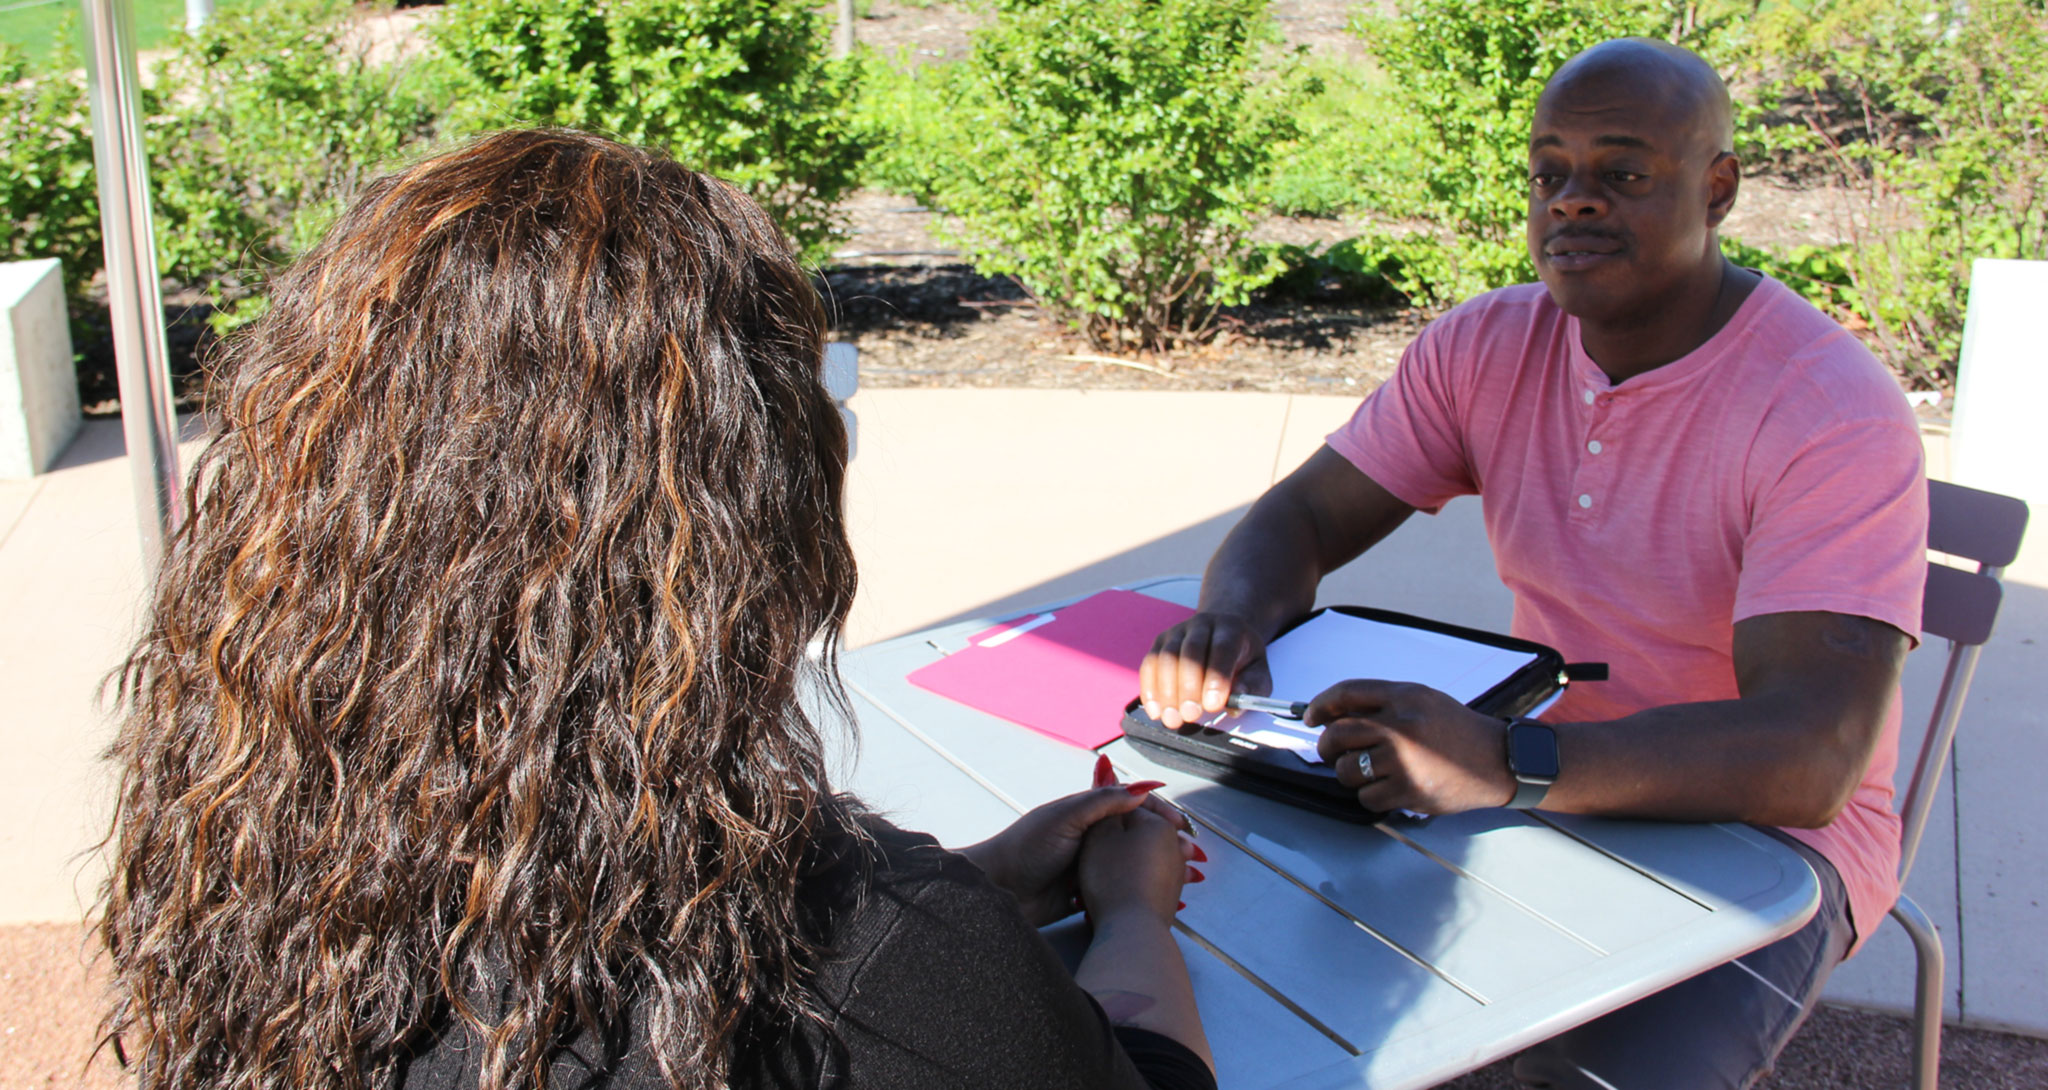 Tyrone Patterson, a psychiatric social worker and mental health survivor, meeting with a client in the park.